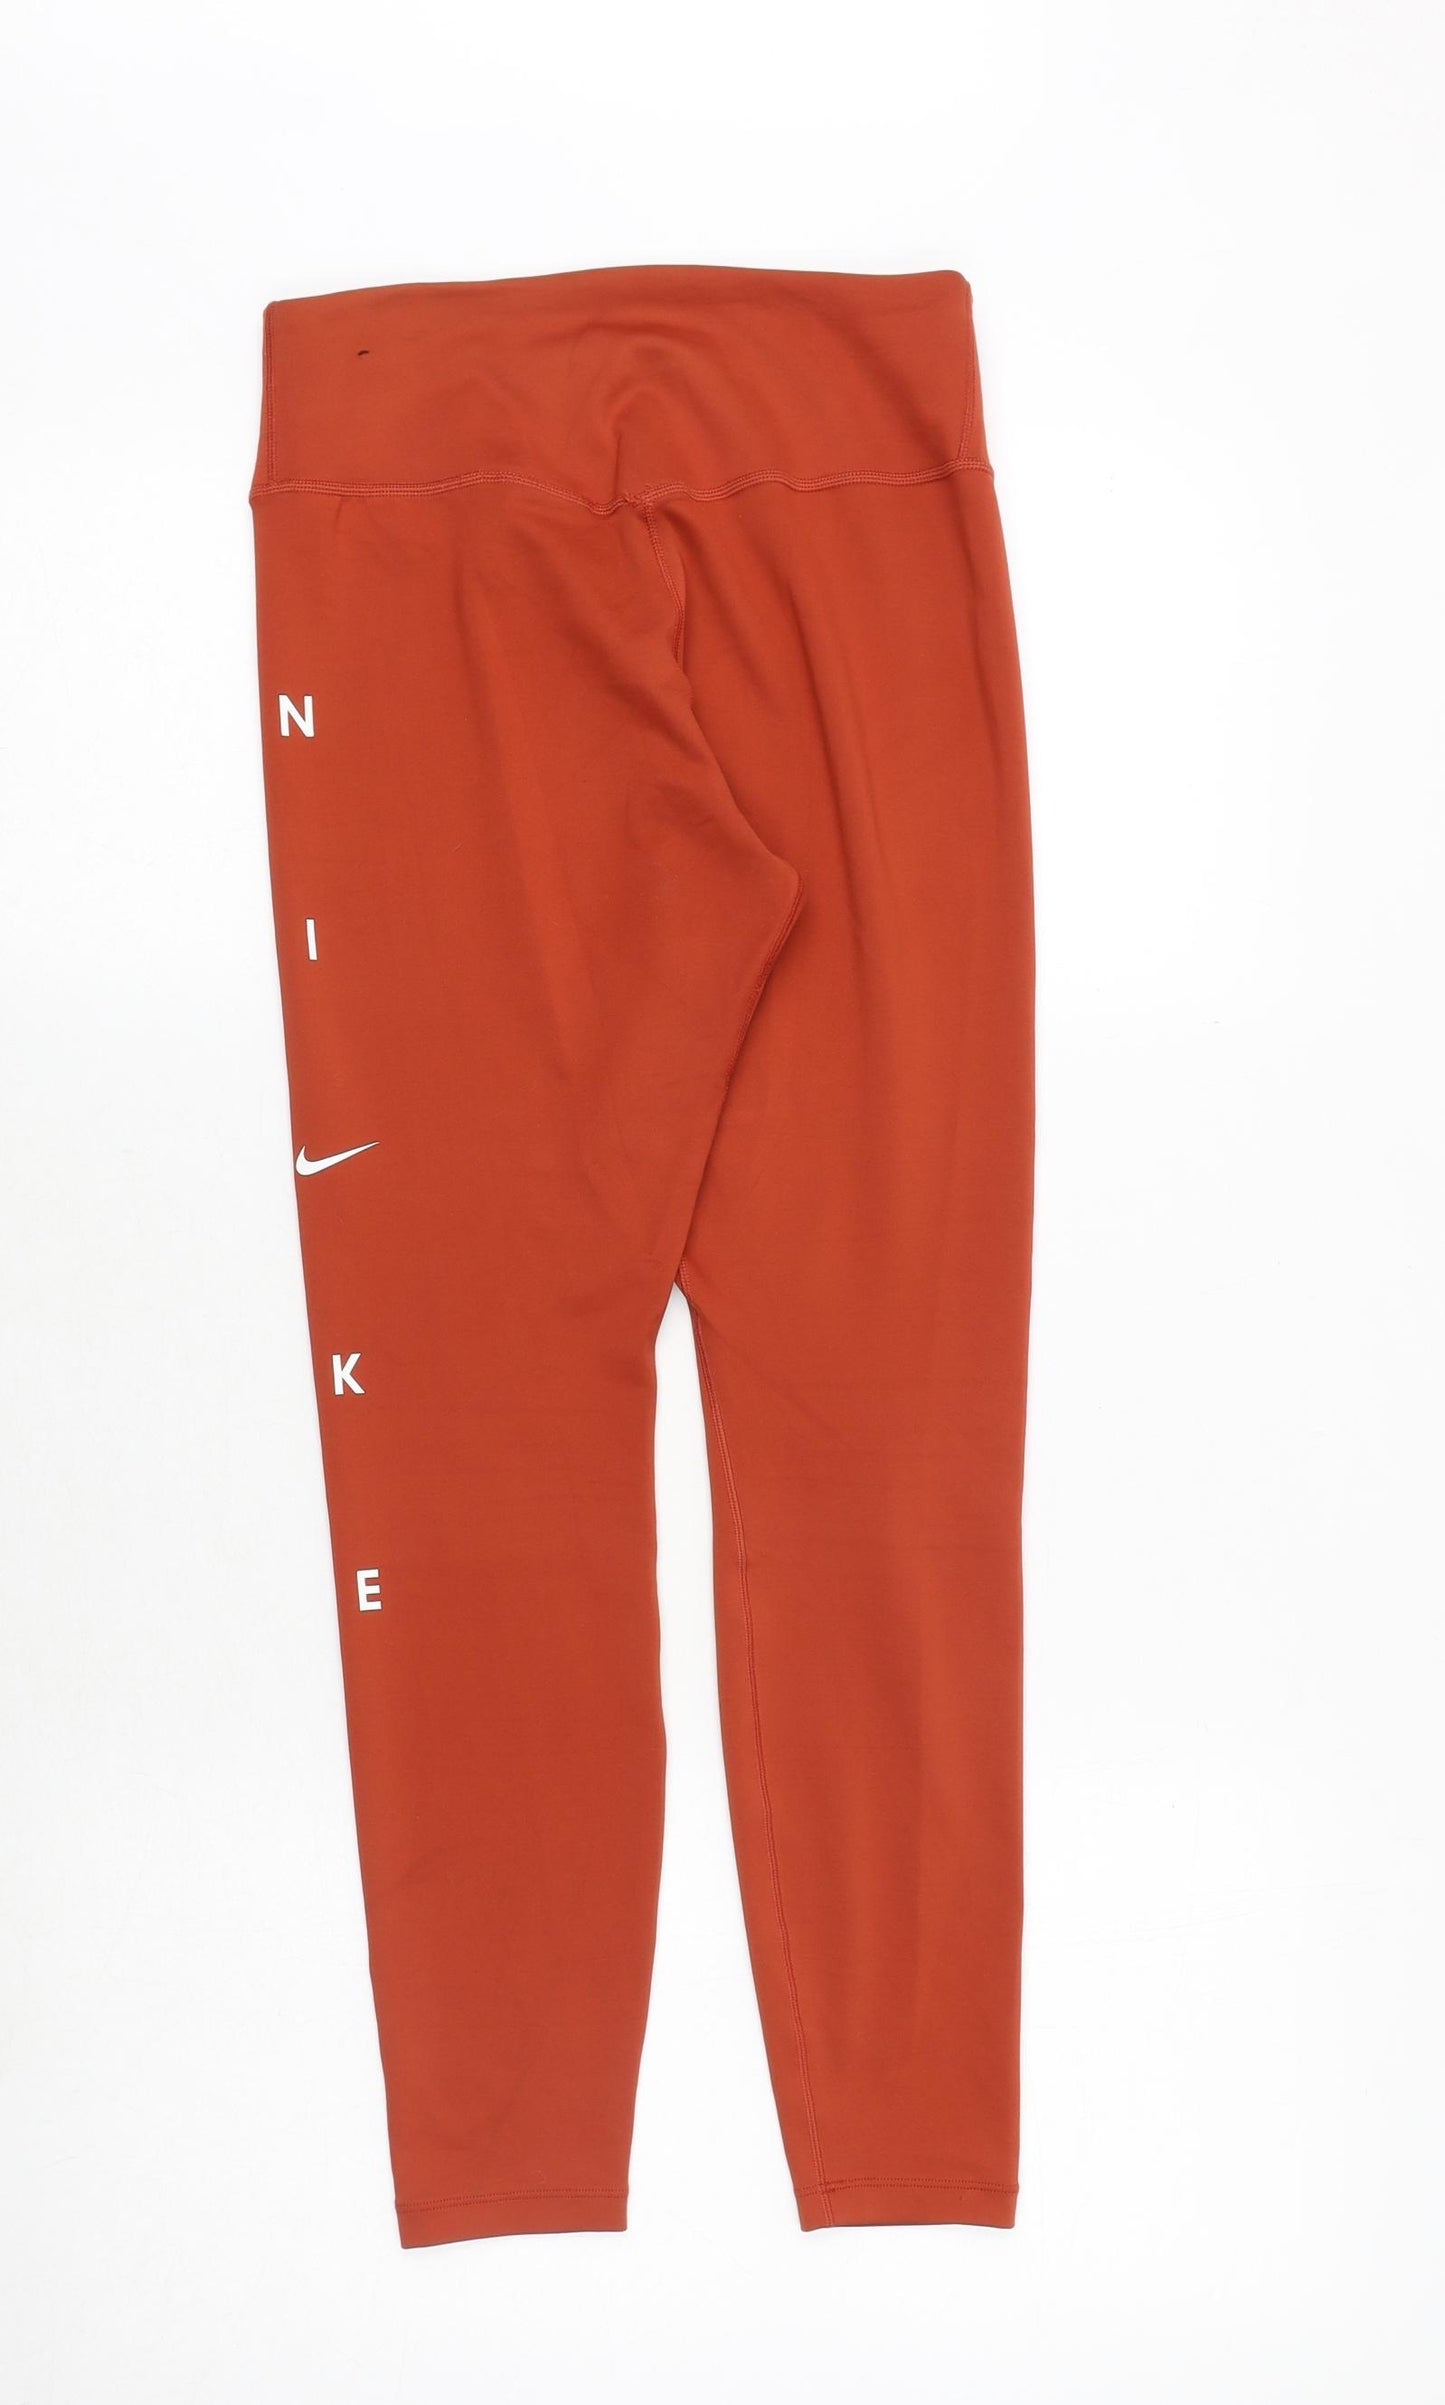 Nike Womens Red Polyester Compression Leggings Size S Regular